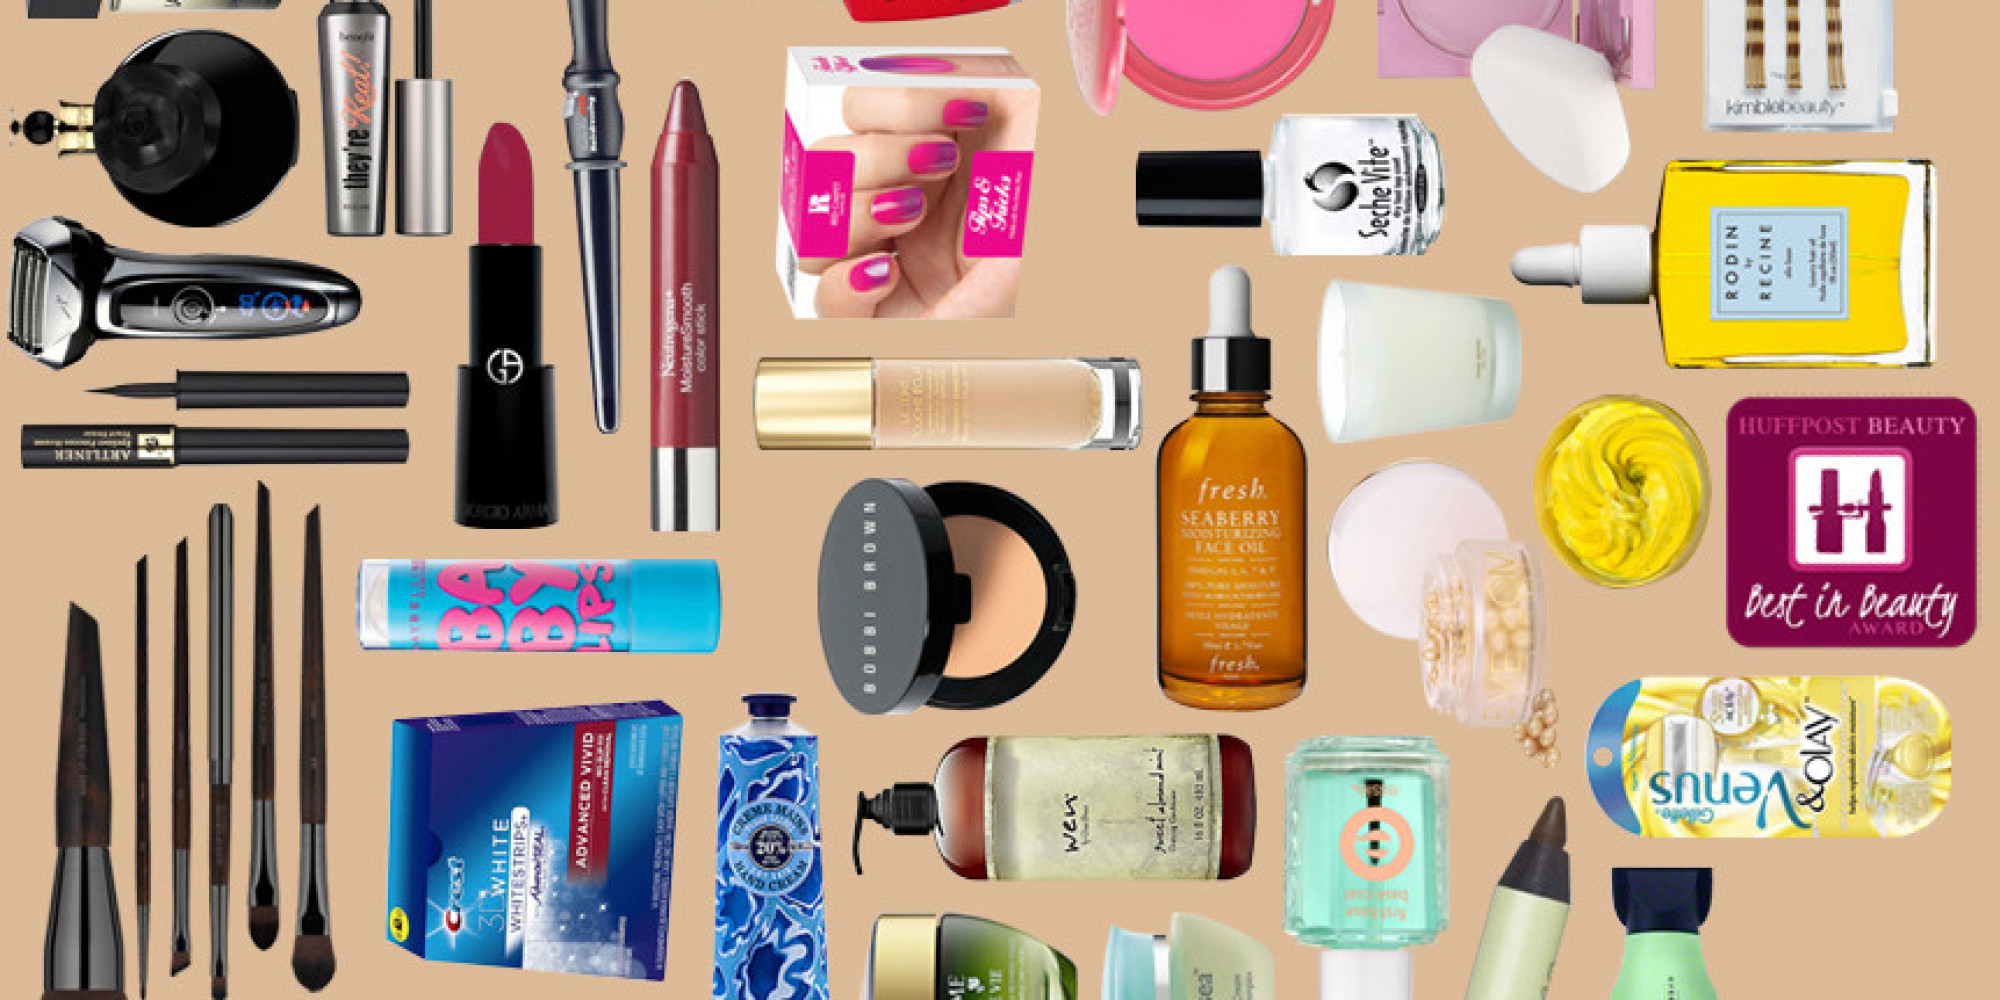 33-beauty-products-we-were-obsessed-with-in-2013